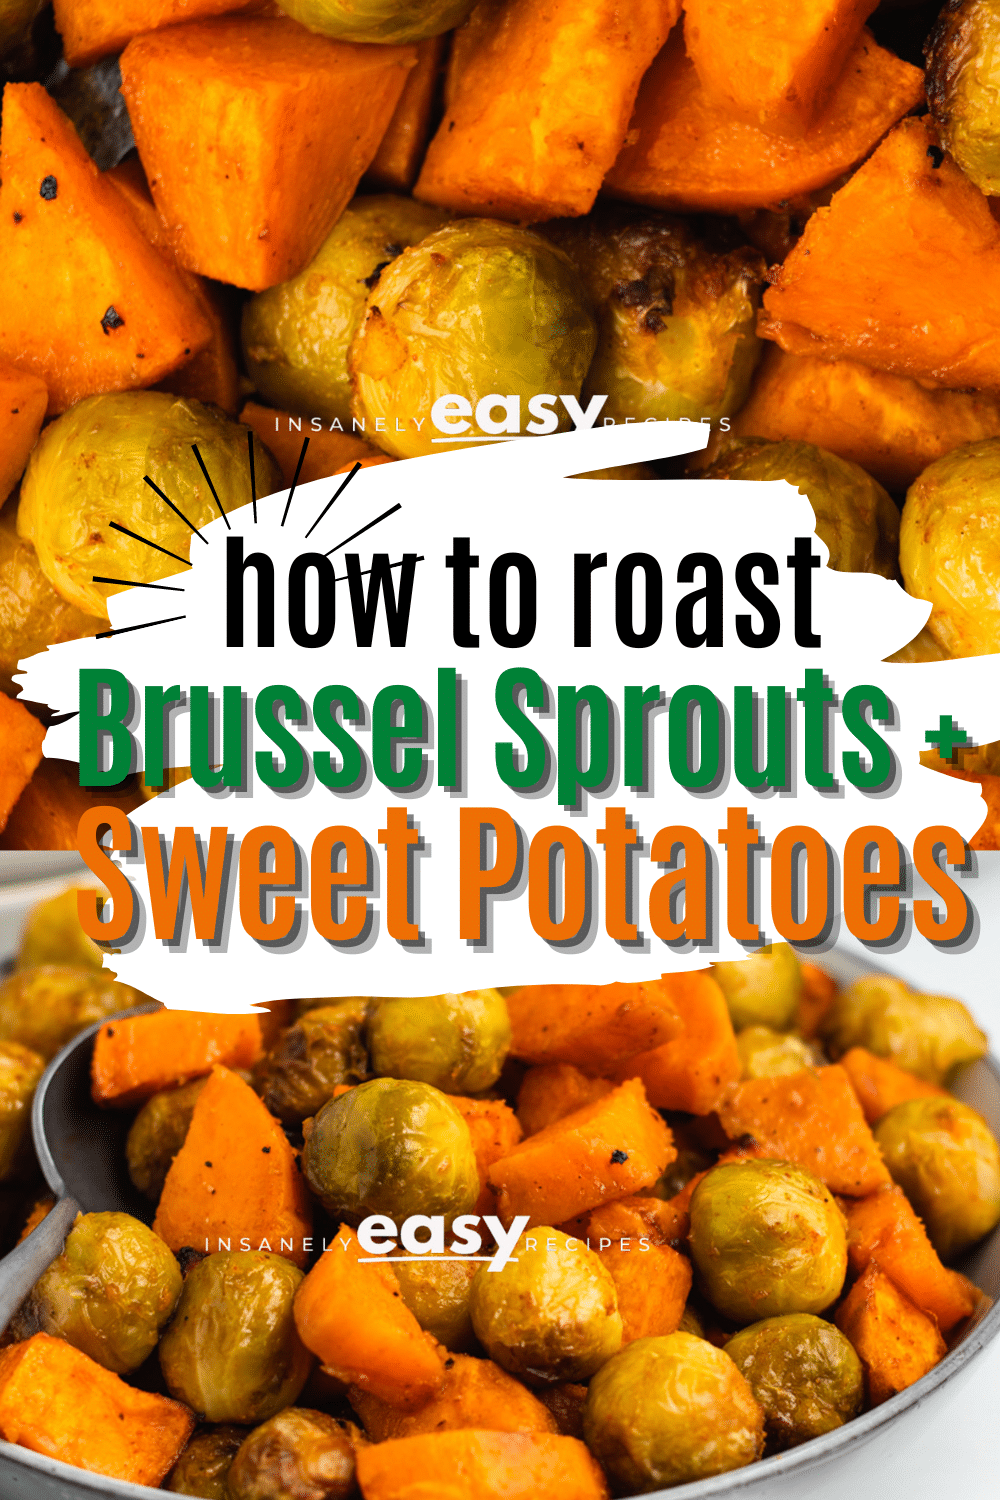 Pinterest photo of roasted brussel sprouts and sweet potatoes